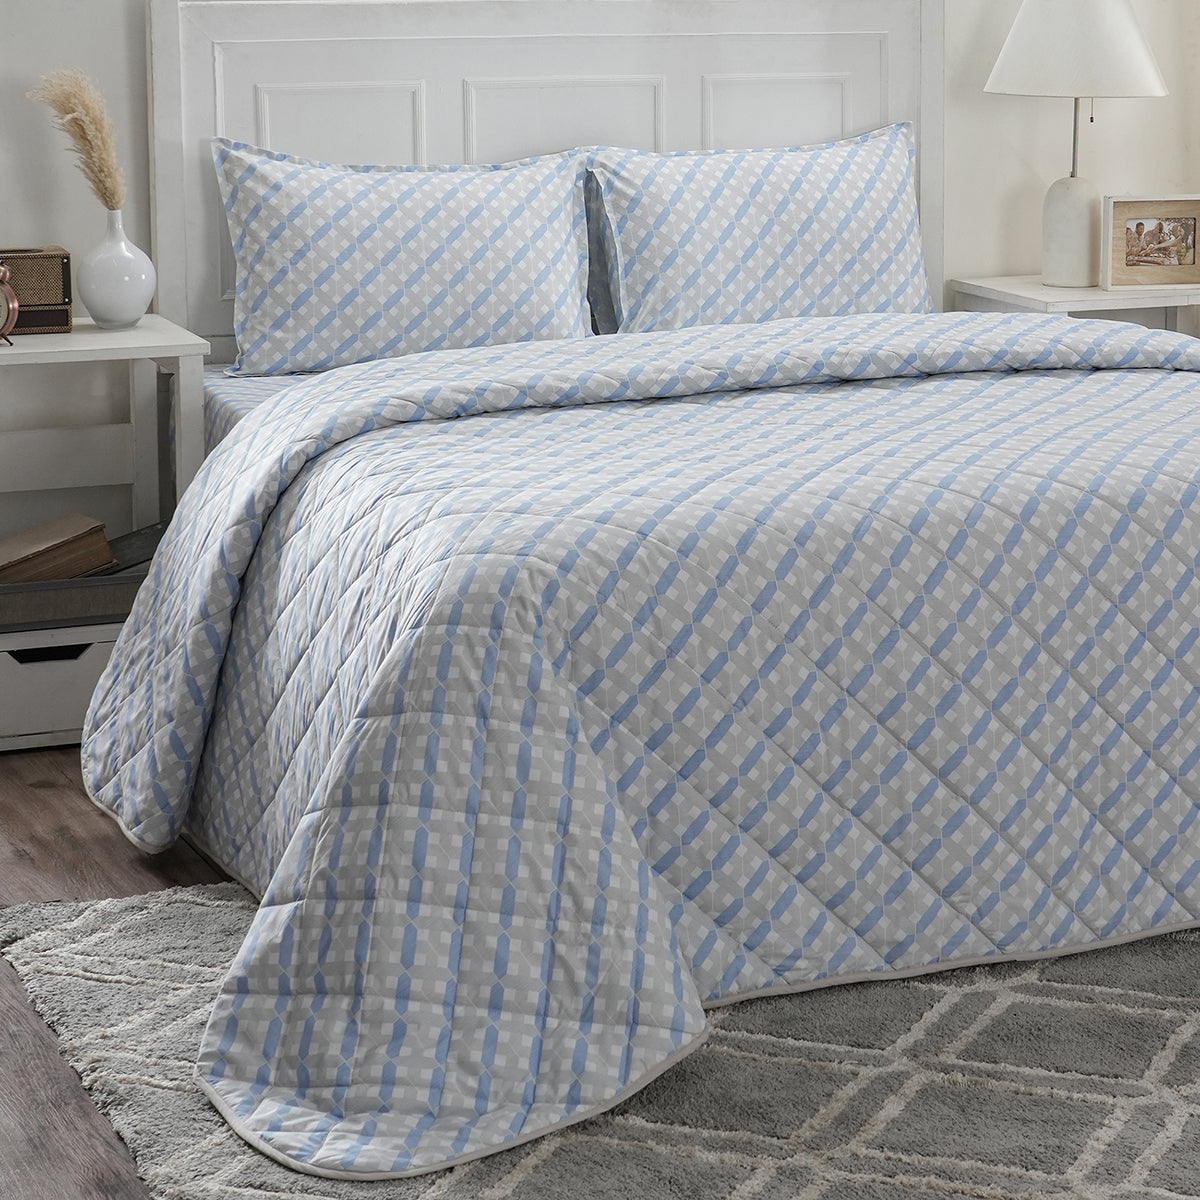 Optimist Bloom Esther 110 GSM Summer AC Quilt/Quilted Bed Cover/Comforter